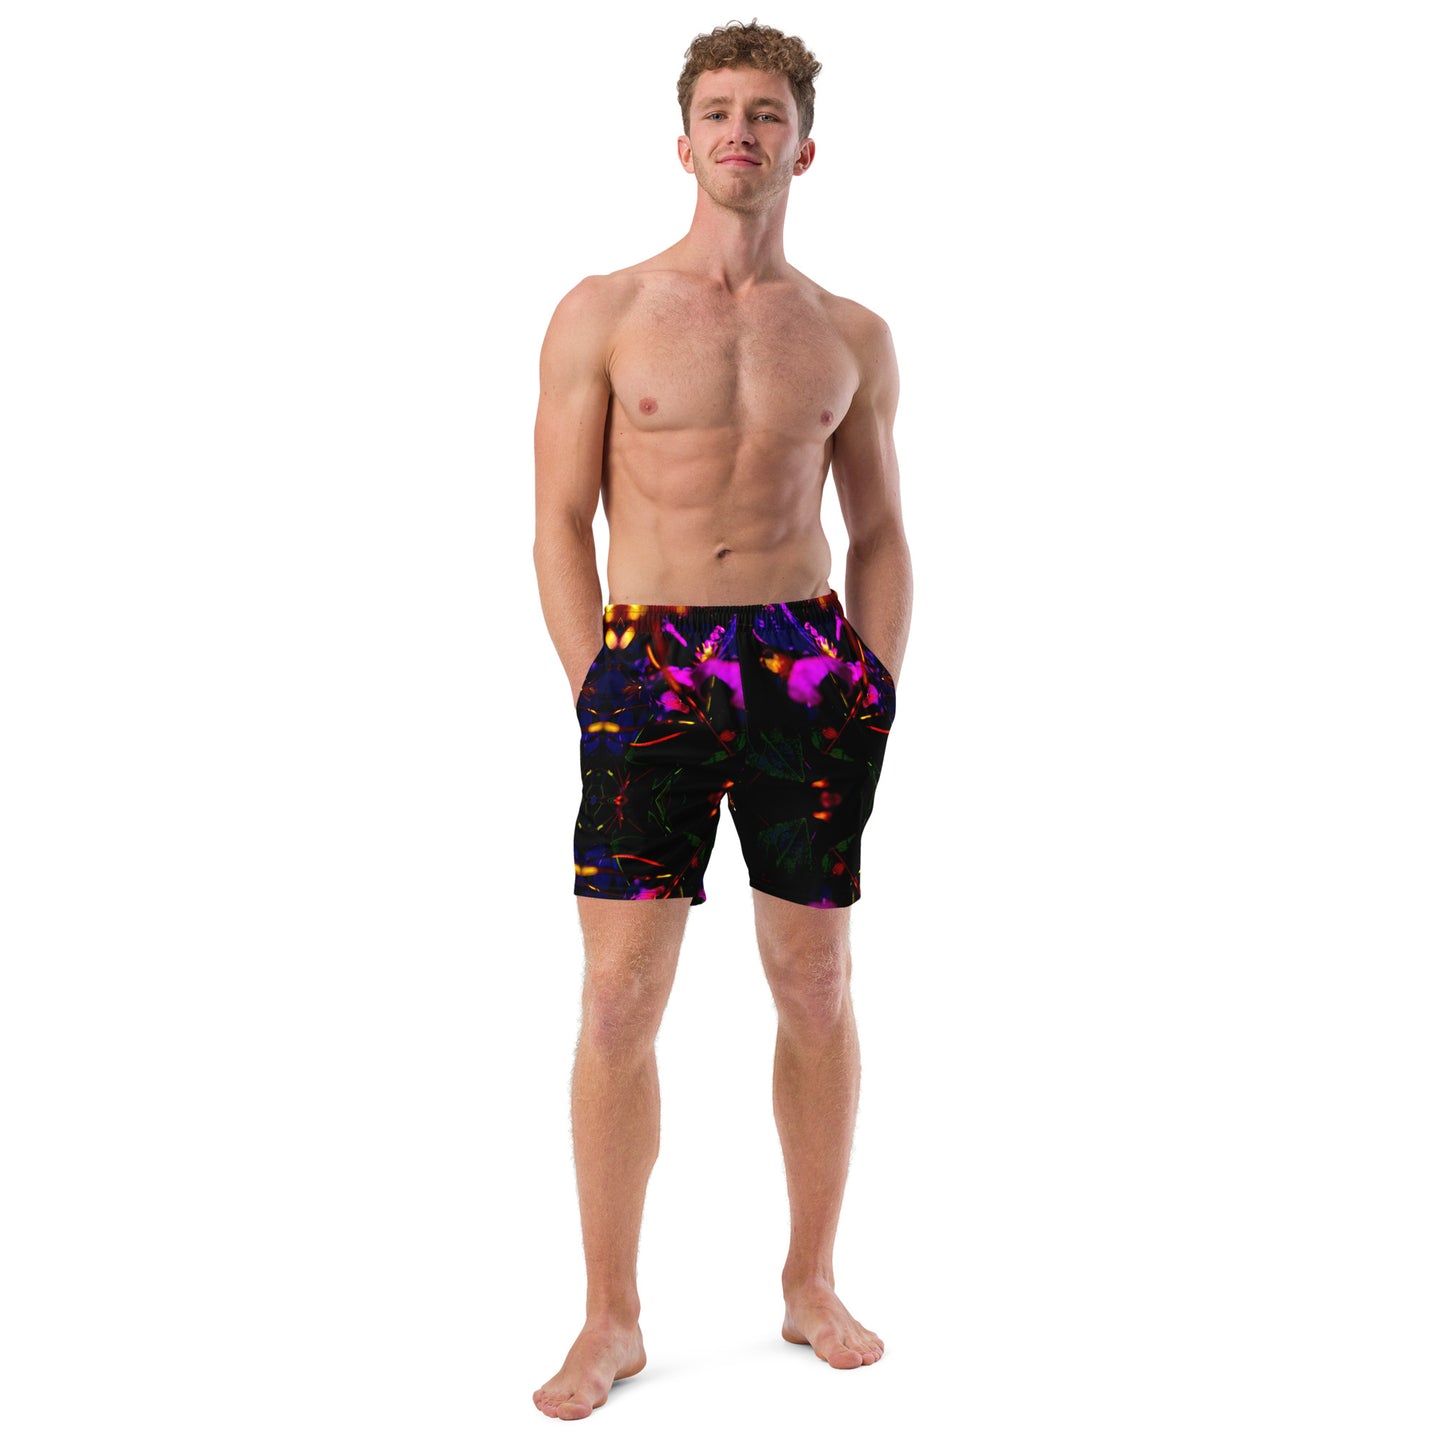 The Beauty of Ingenuity Recycled Board Shorts UPF 50+